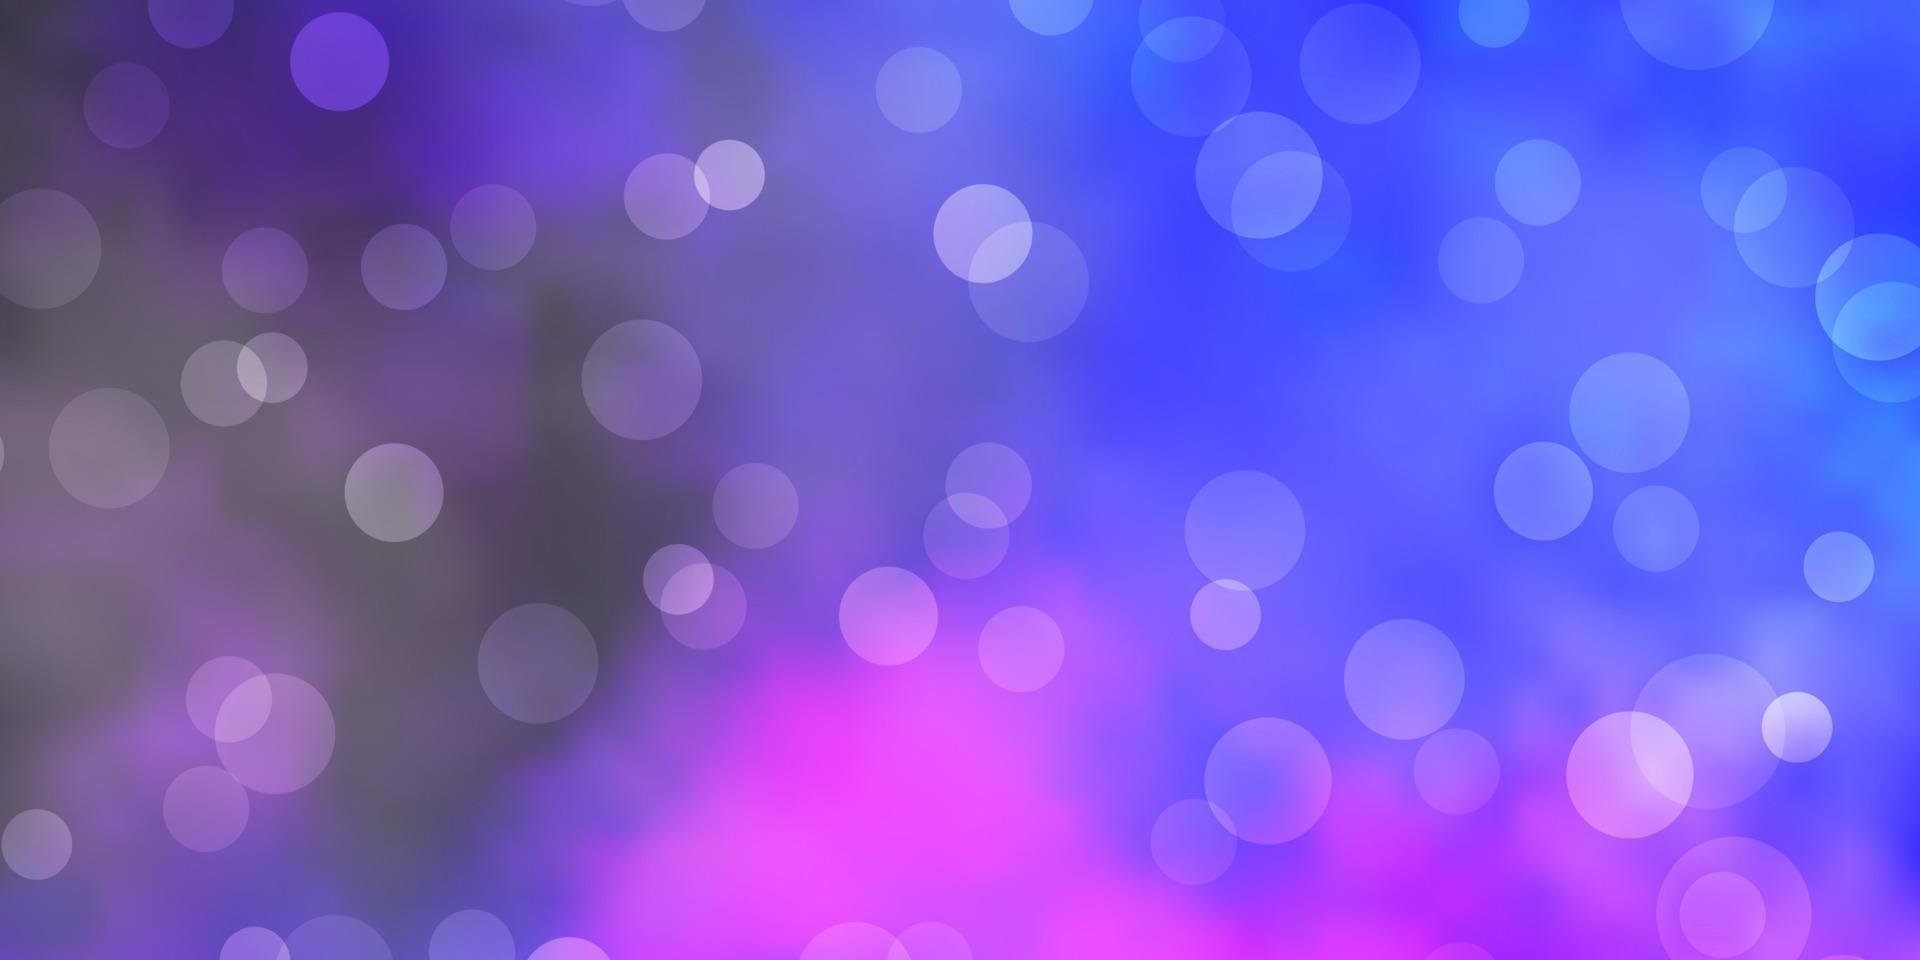 Dark Pink, Blue vector background with circles.